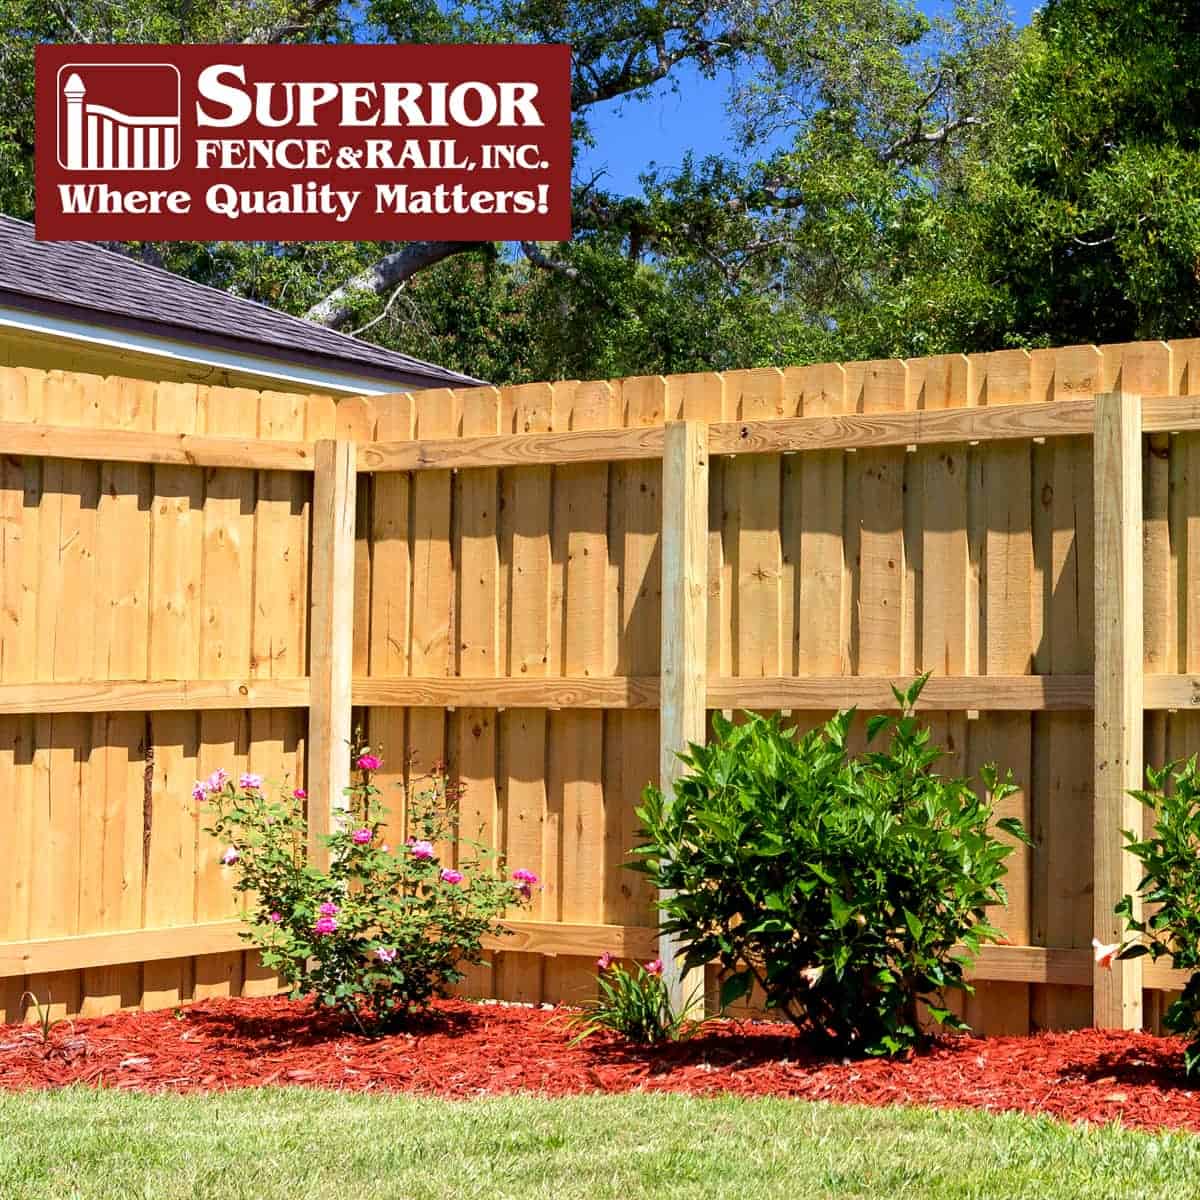 Temecula fence company contractor